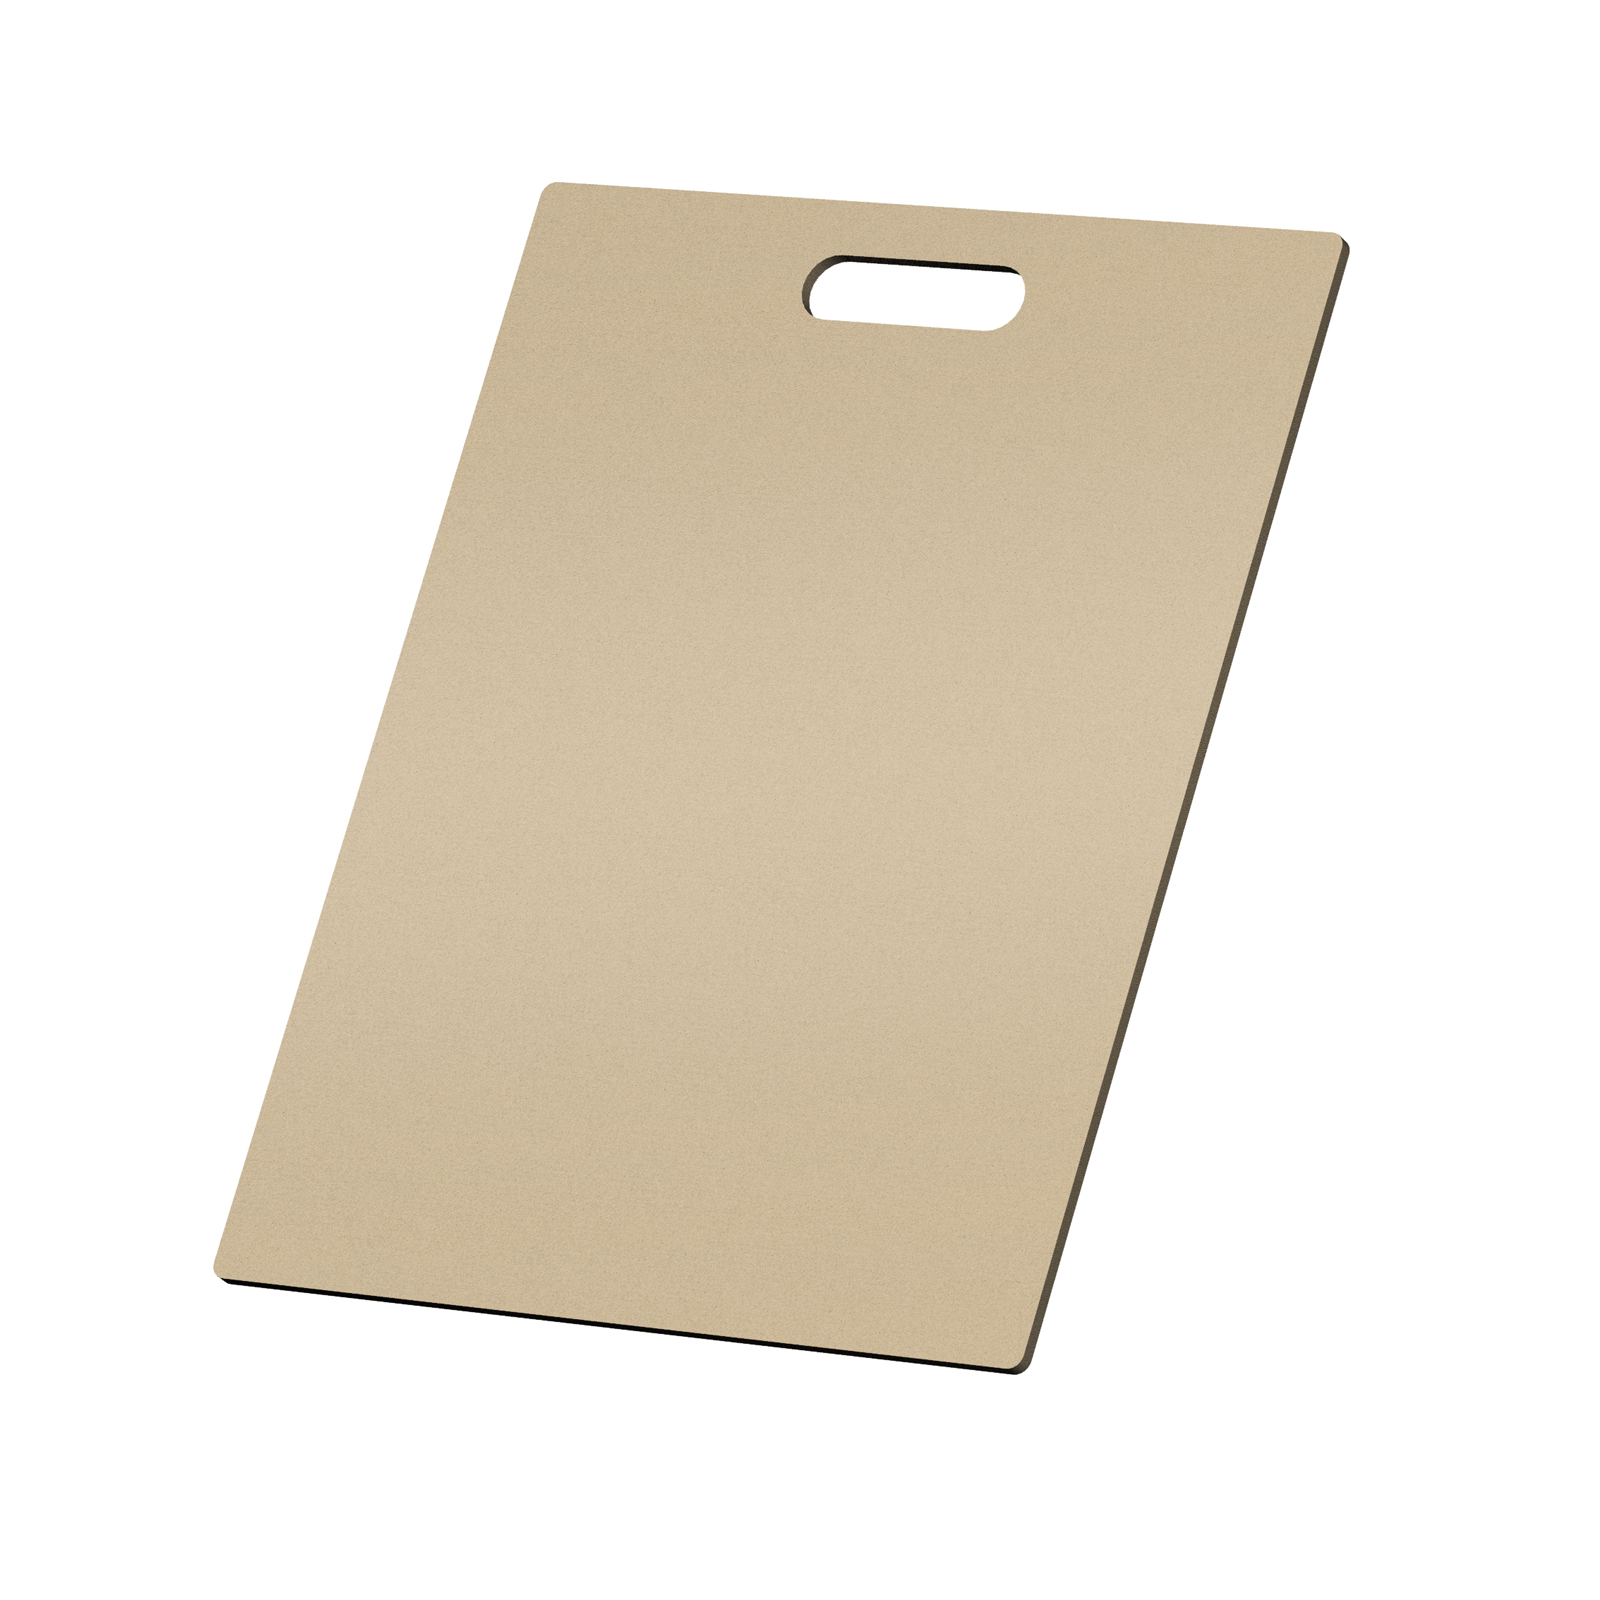 Overstock Special 15 inch x 19 inch Raw MDF Display Board for Tile Flooring Stone Wood